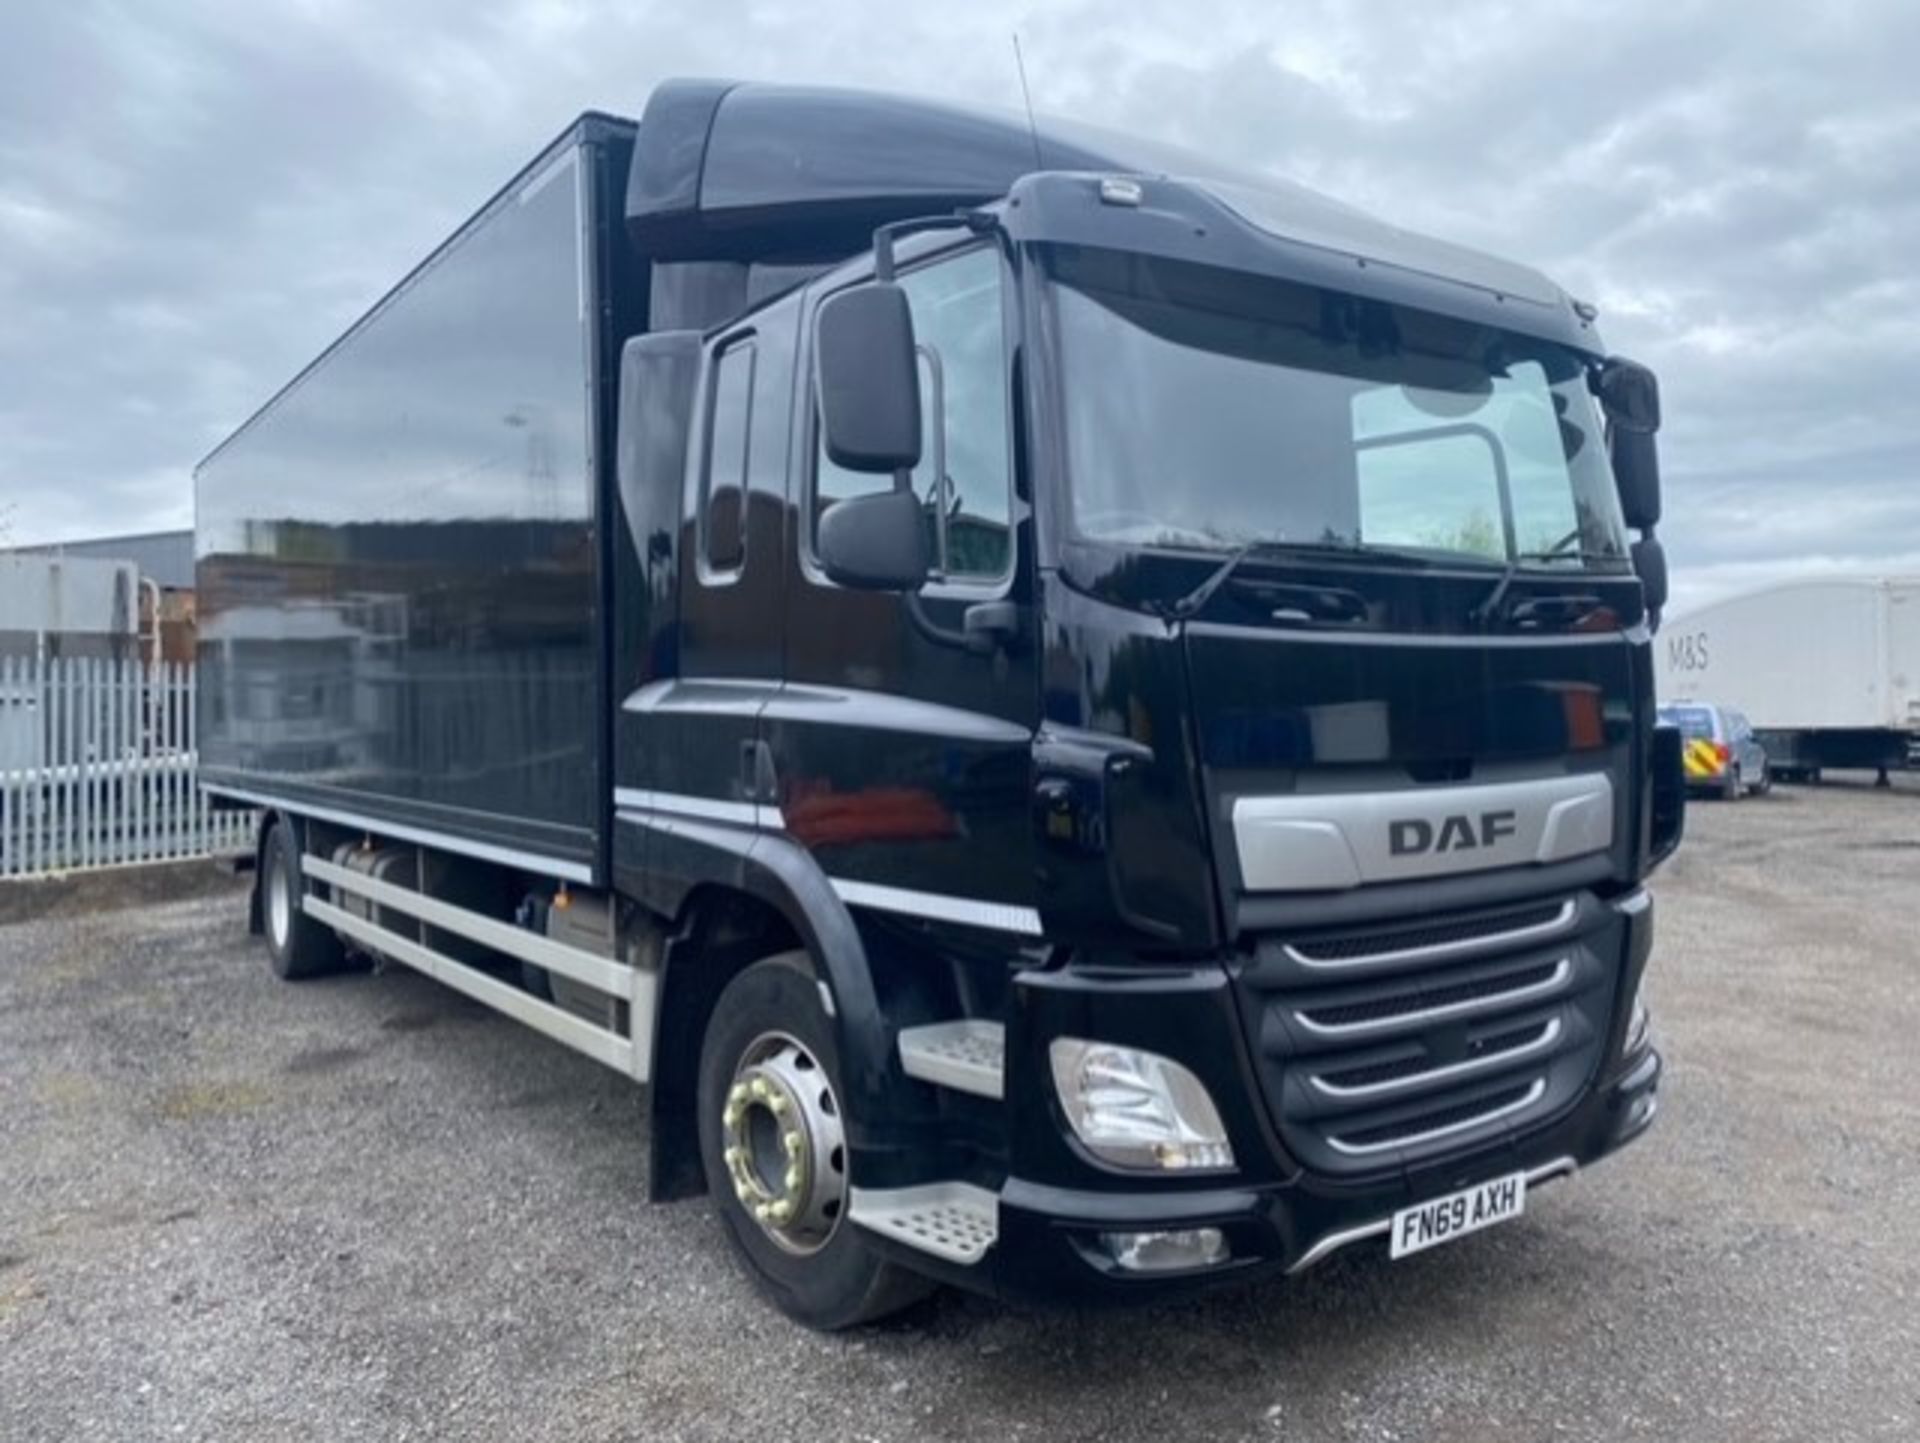 2019, DAF CF 260 FA (Ex-Fleet Owned & Maintained) - FN69 AXH (18 Ton Rigid Truck with Tail Lift) - Bild 20 aus 22